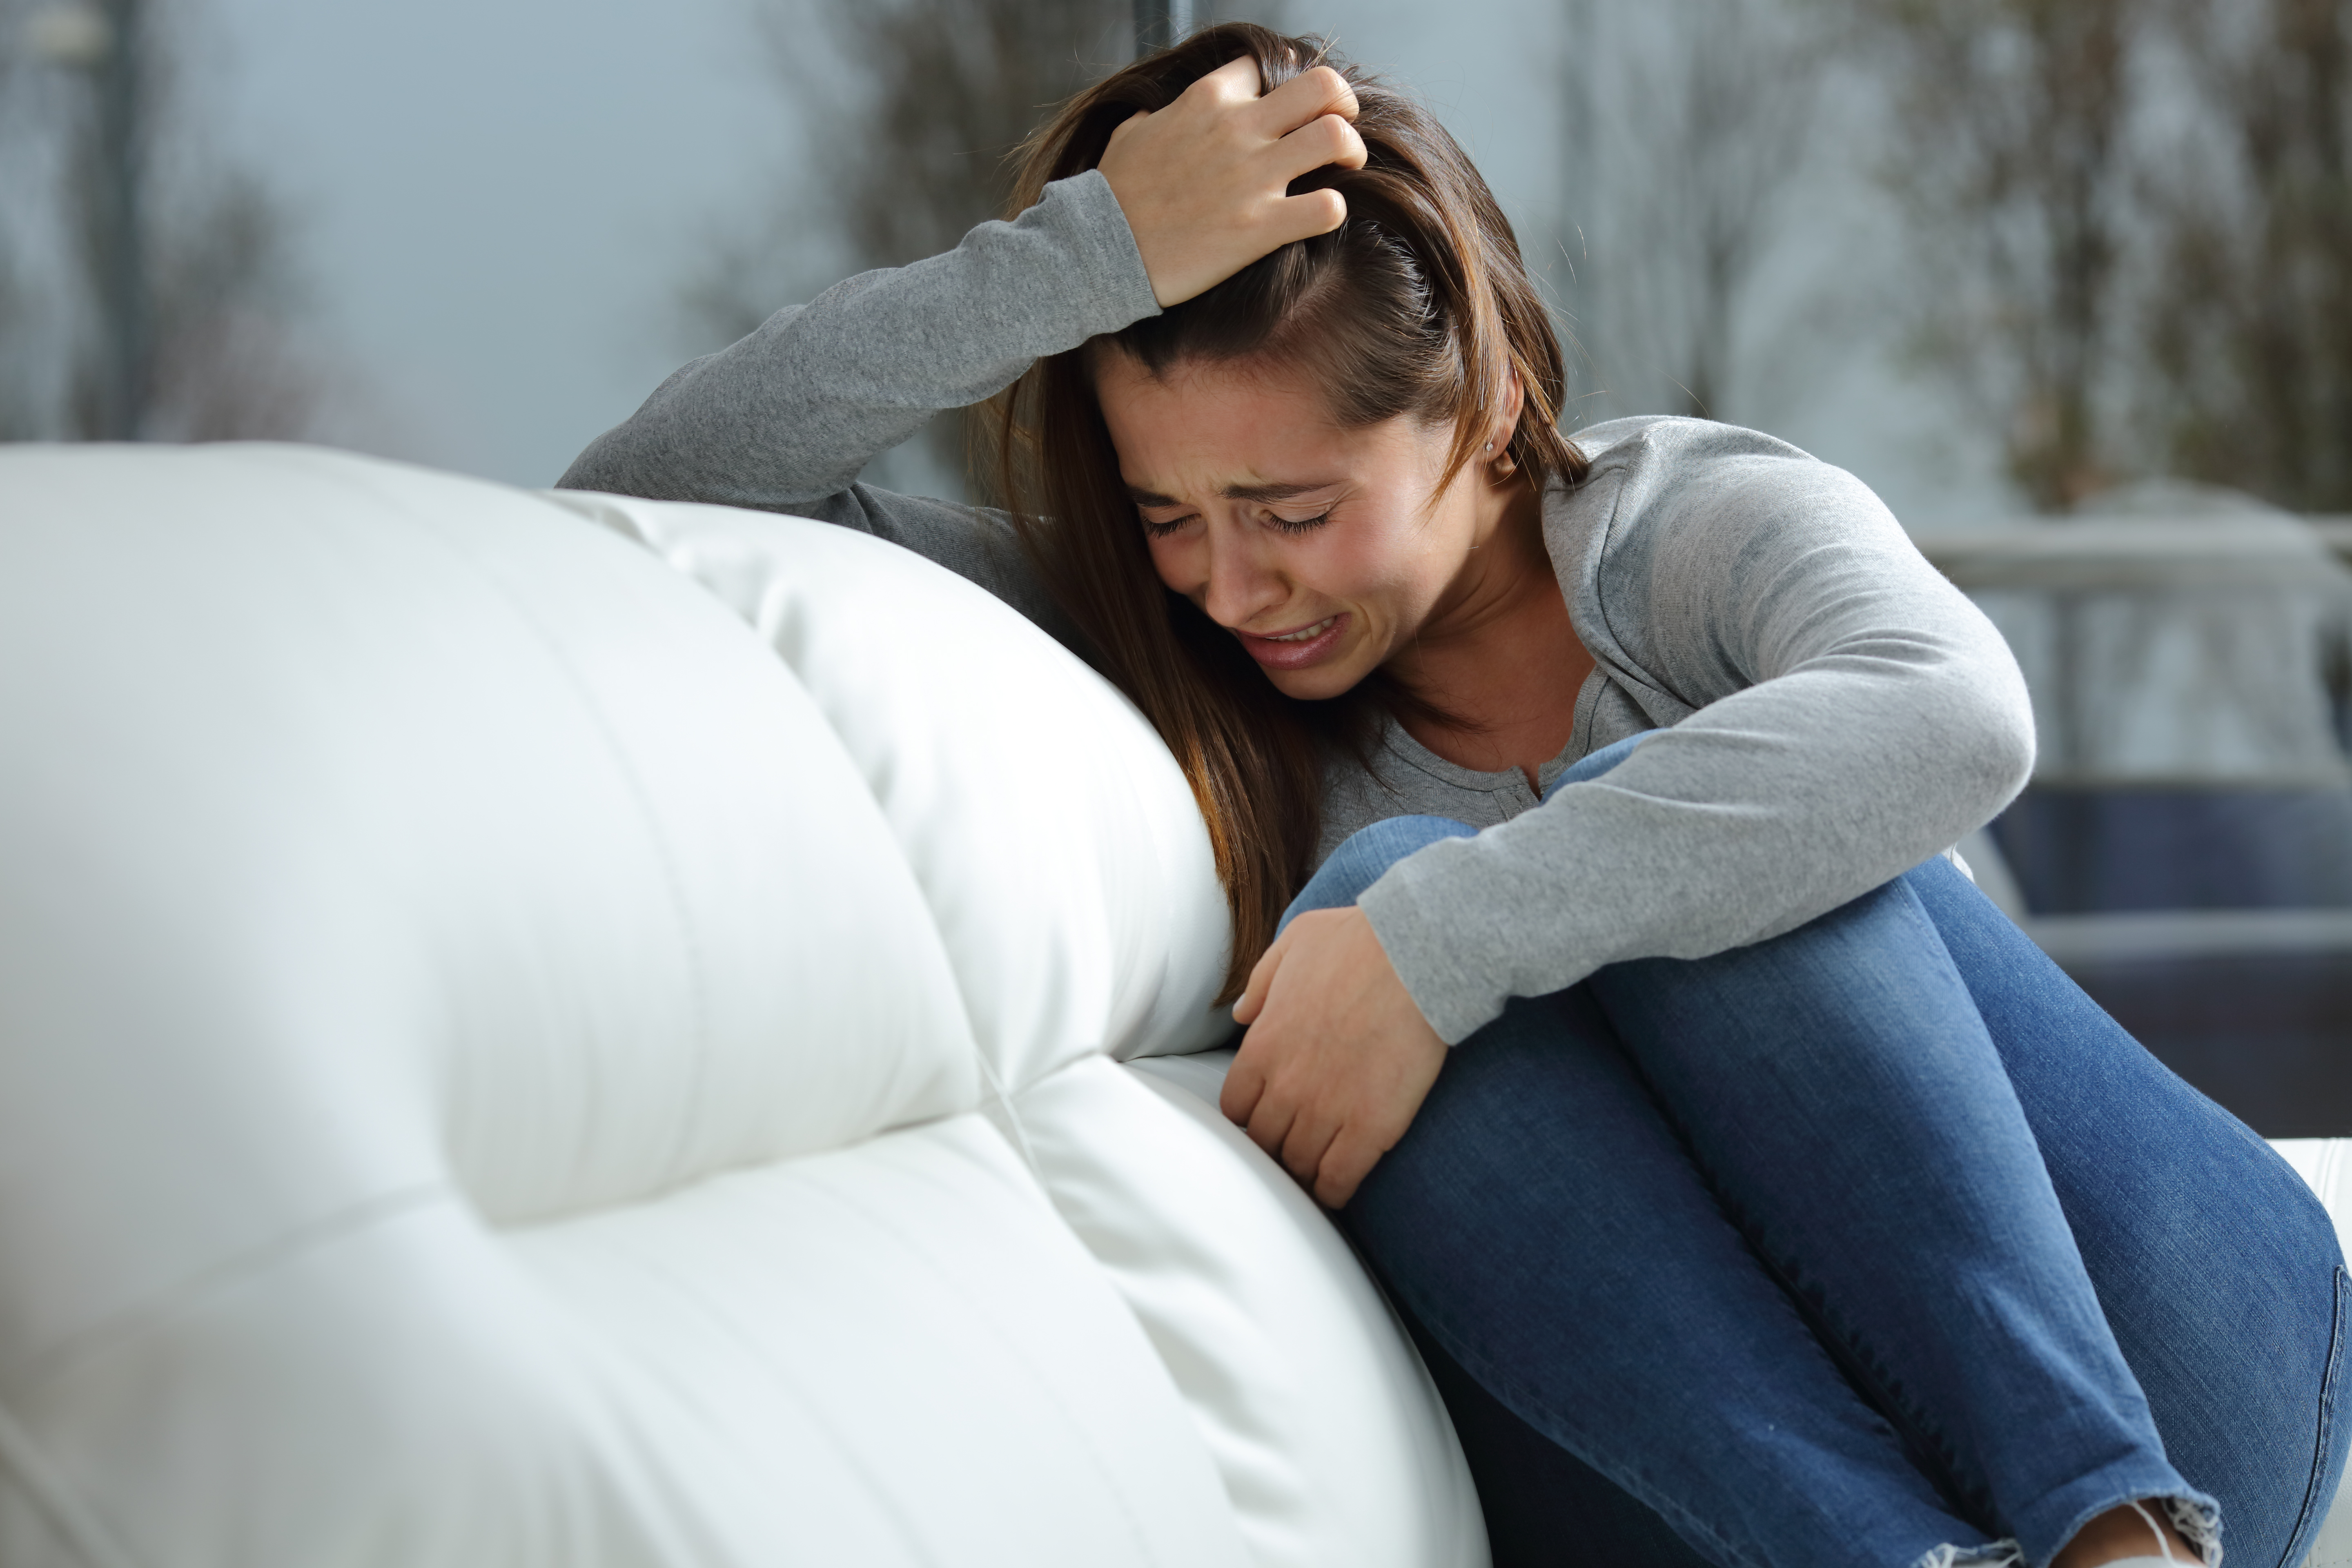 A girl crying on a couch | Source: Shutterstock